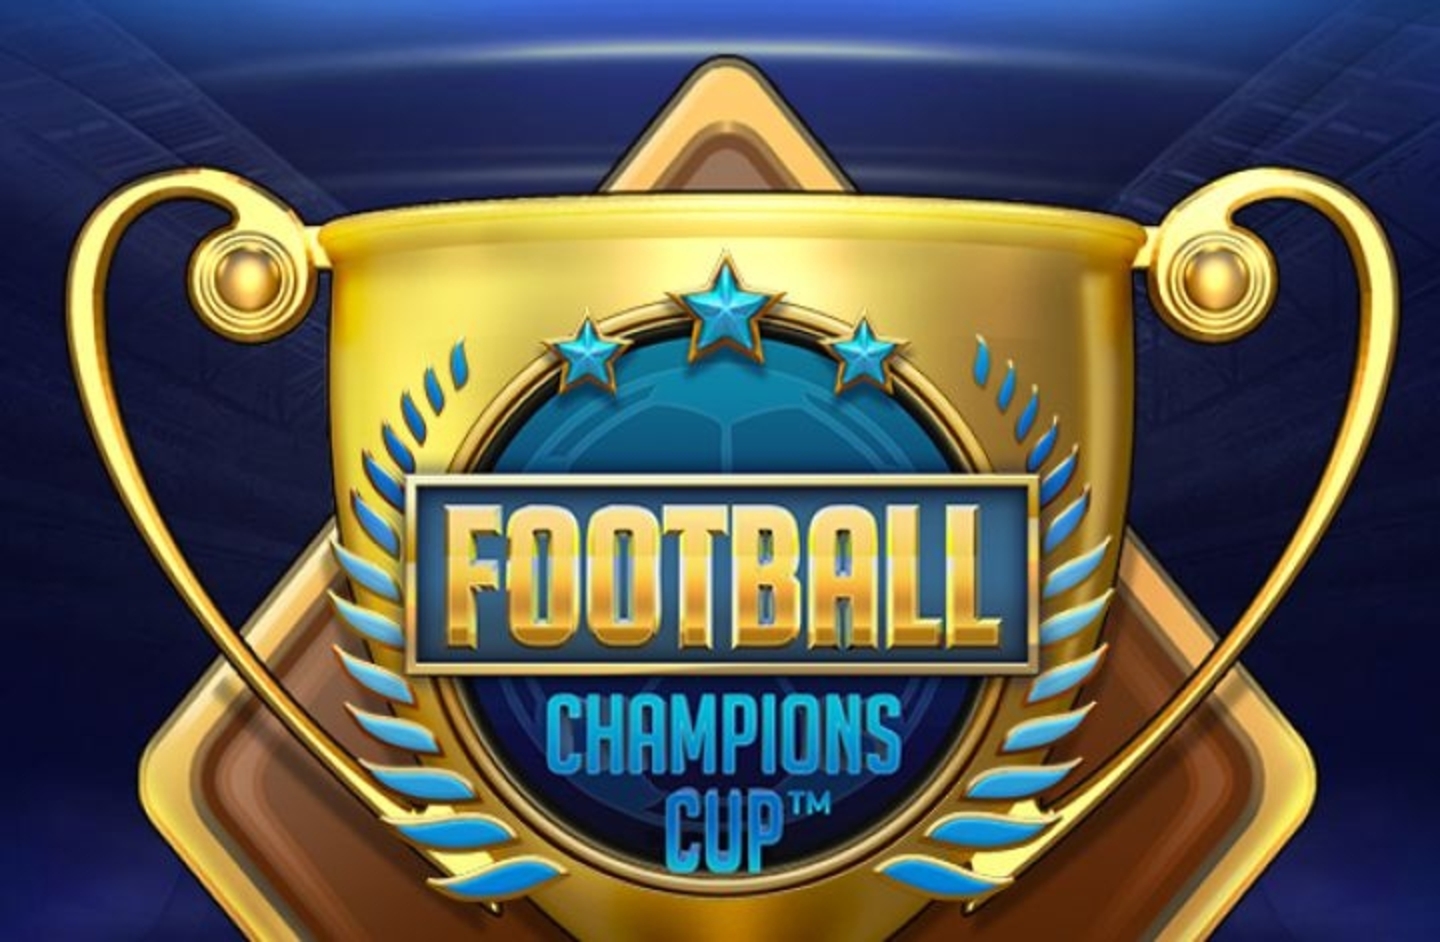 The Football: Champions Cup Online Slot Demo Game by NetEnt